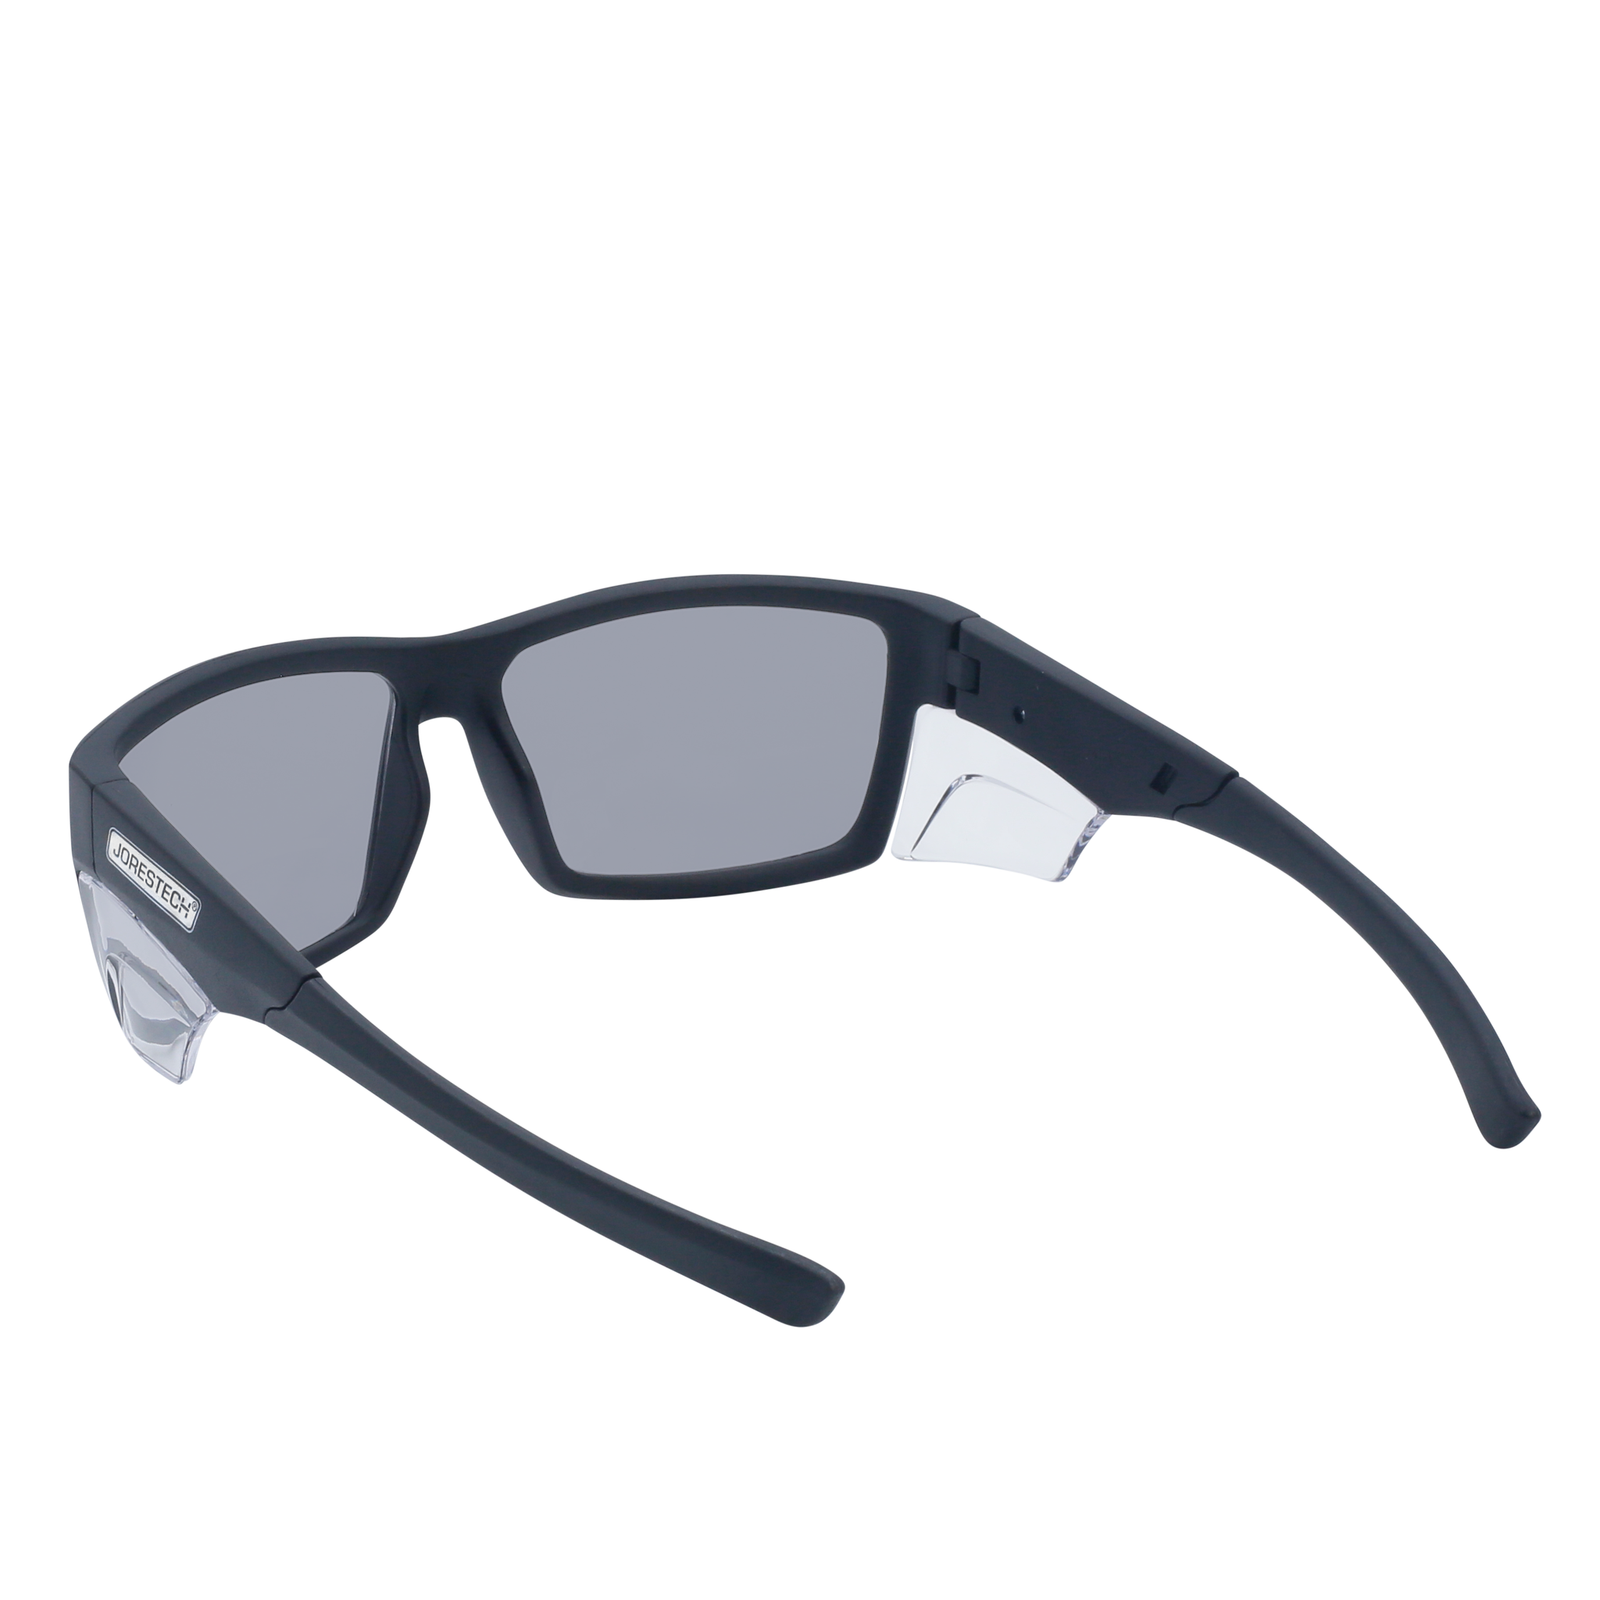 Image show a back view of the JORESTECH safety sun glasses with clear side shields for high impact protection. The background of the image is white.